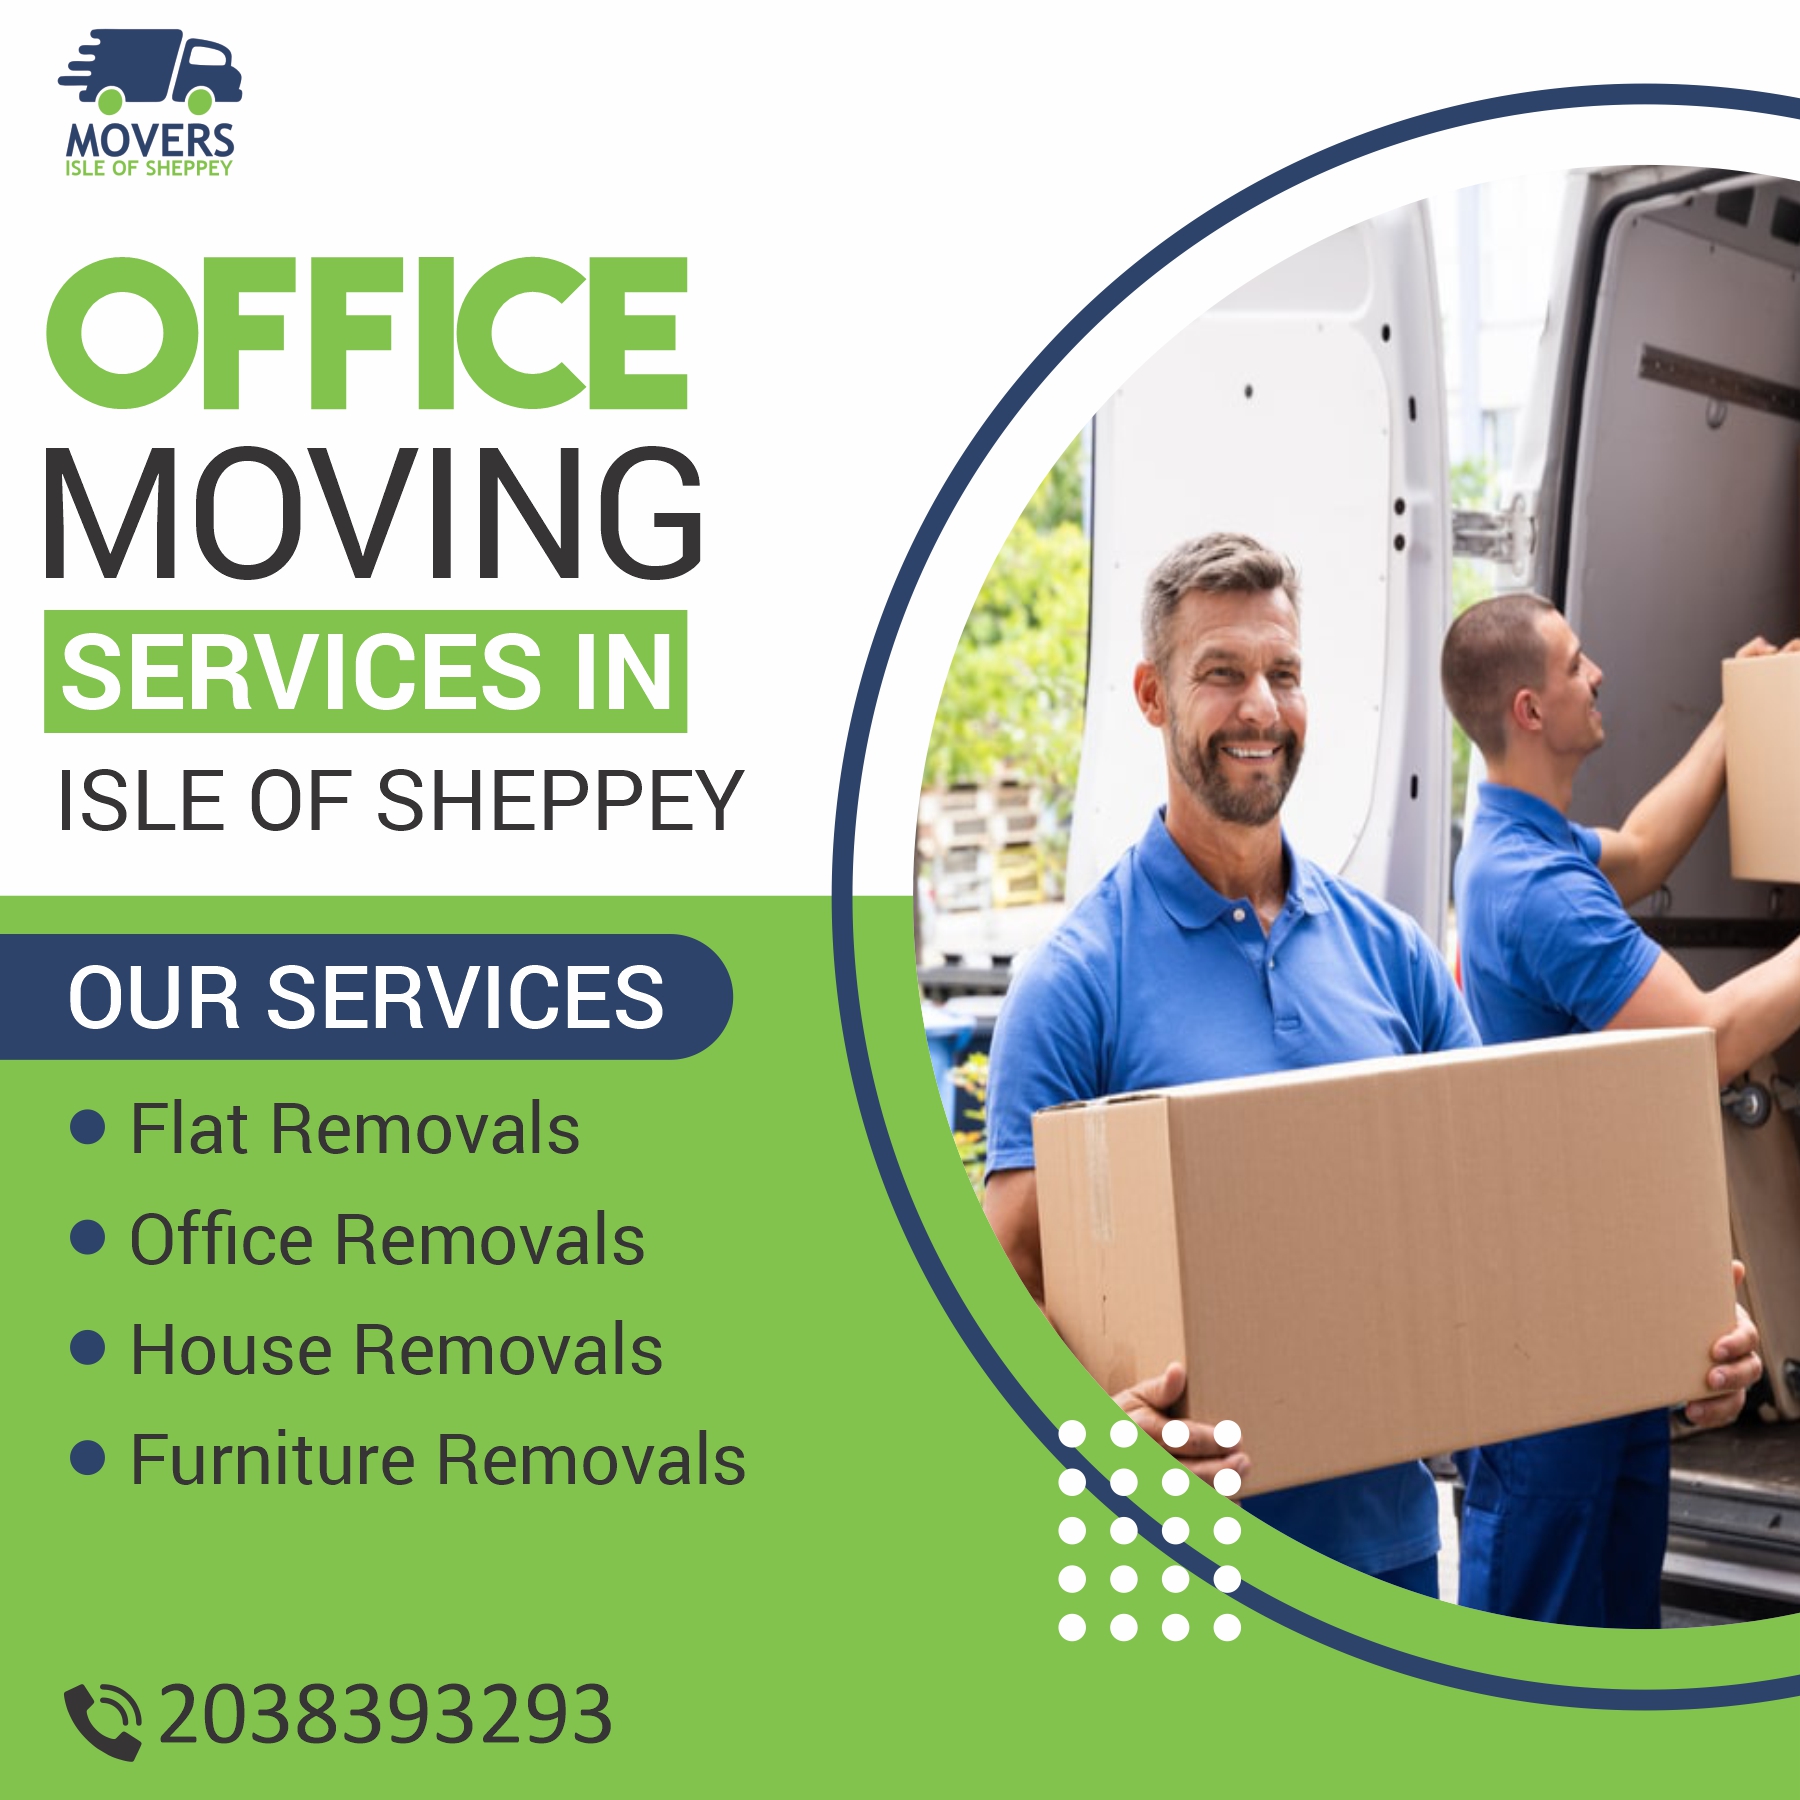 Isle of Sheppey Movers